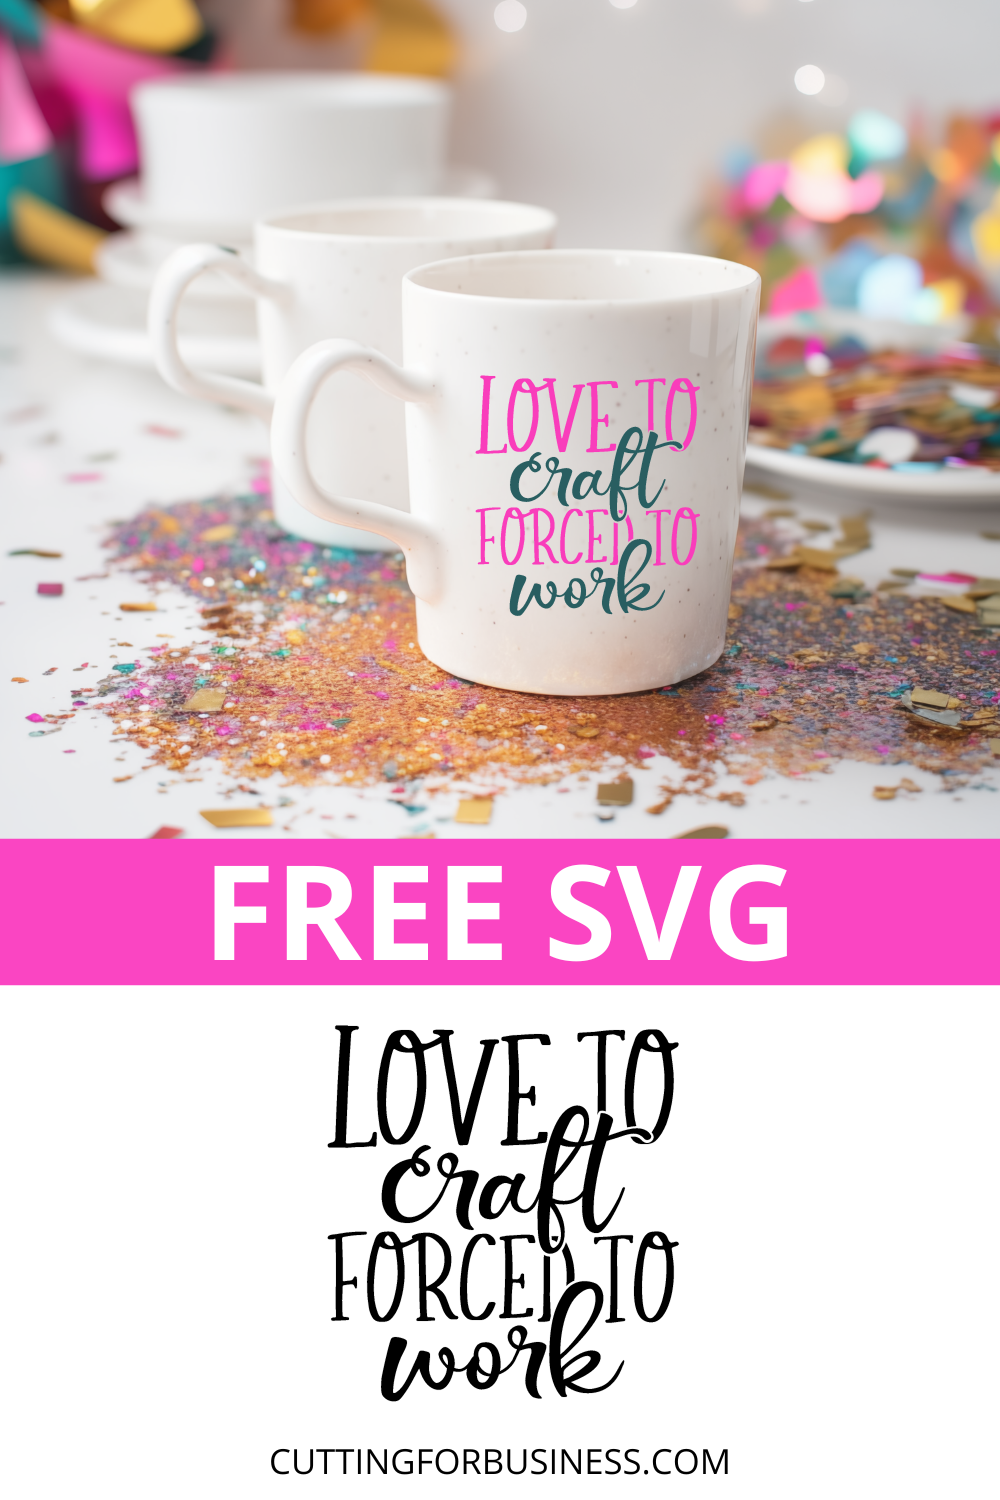 Free SVG - Love to Craft Forced to Work - cuttingforbusiness.com